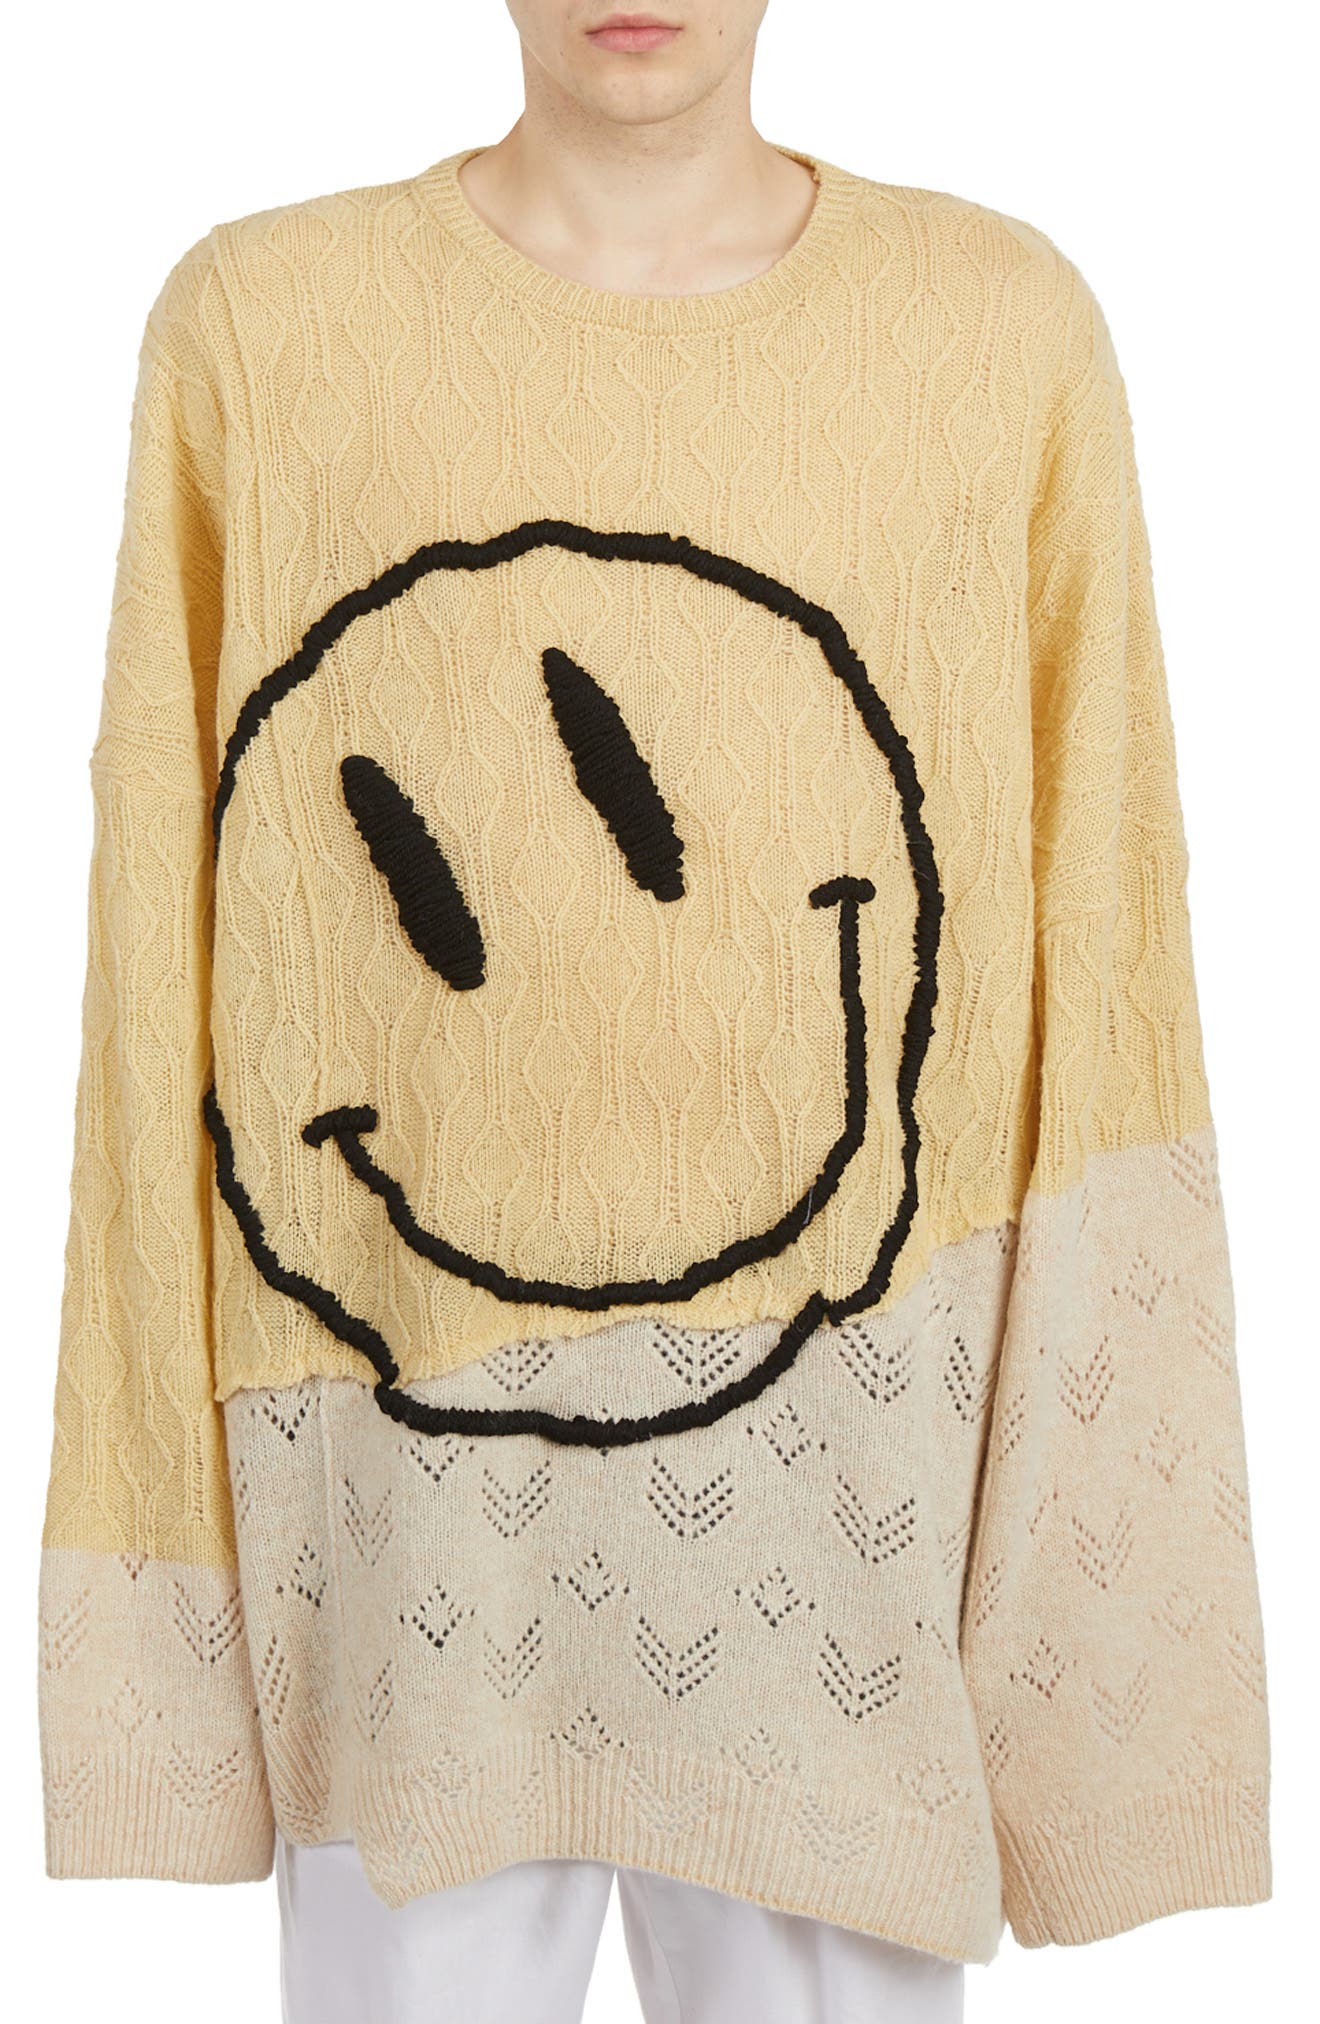 smiley face sweater